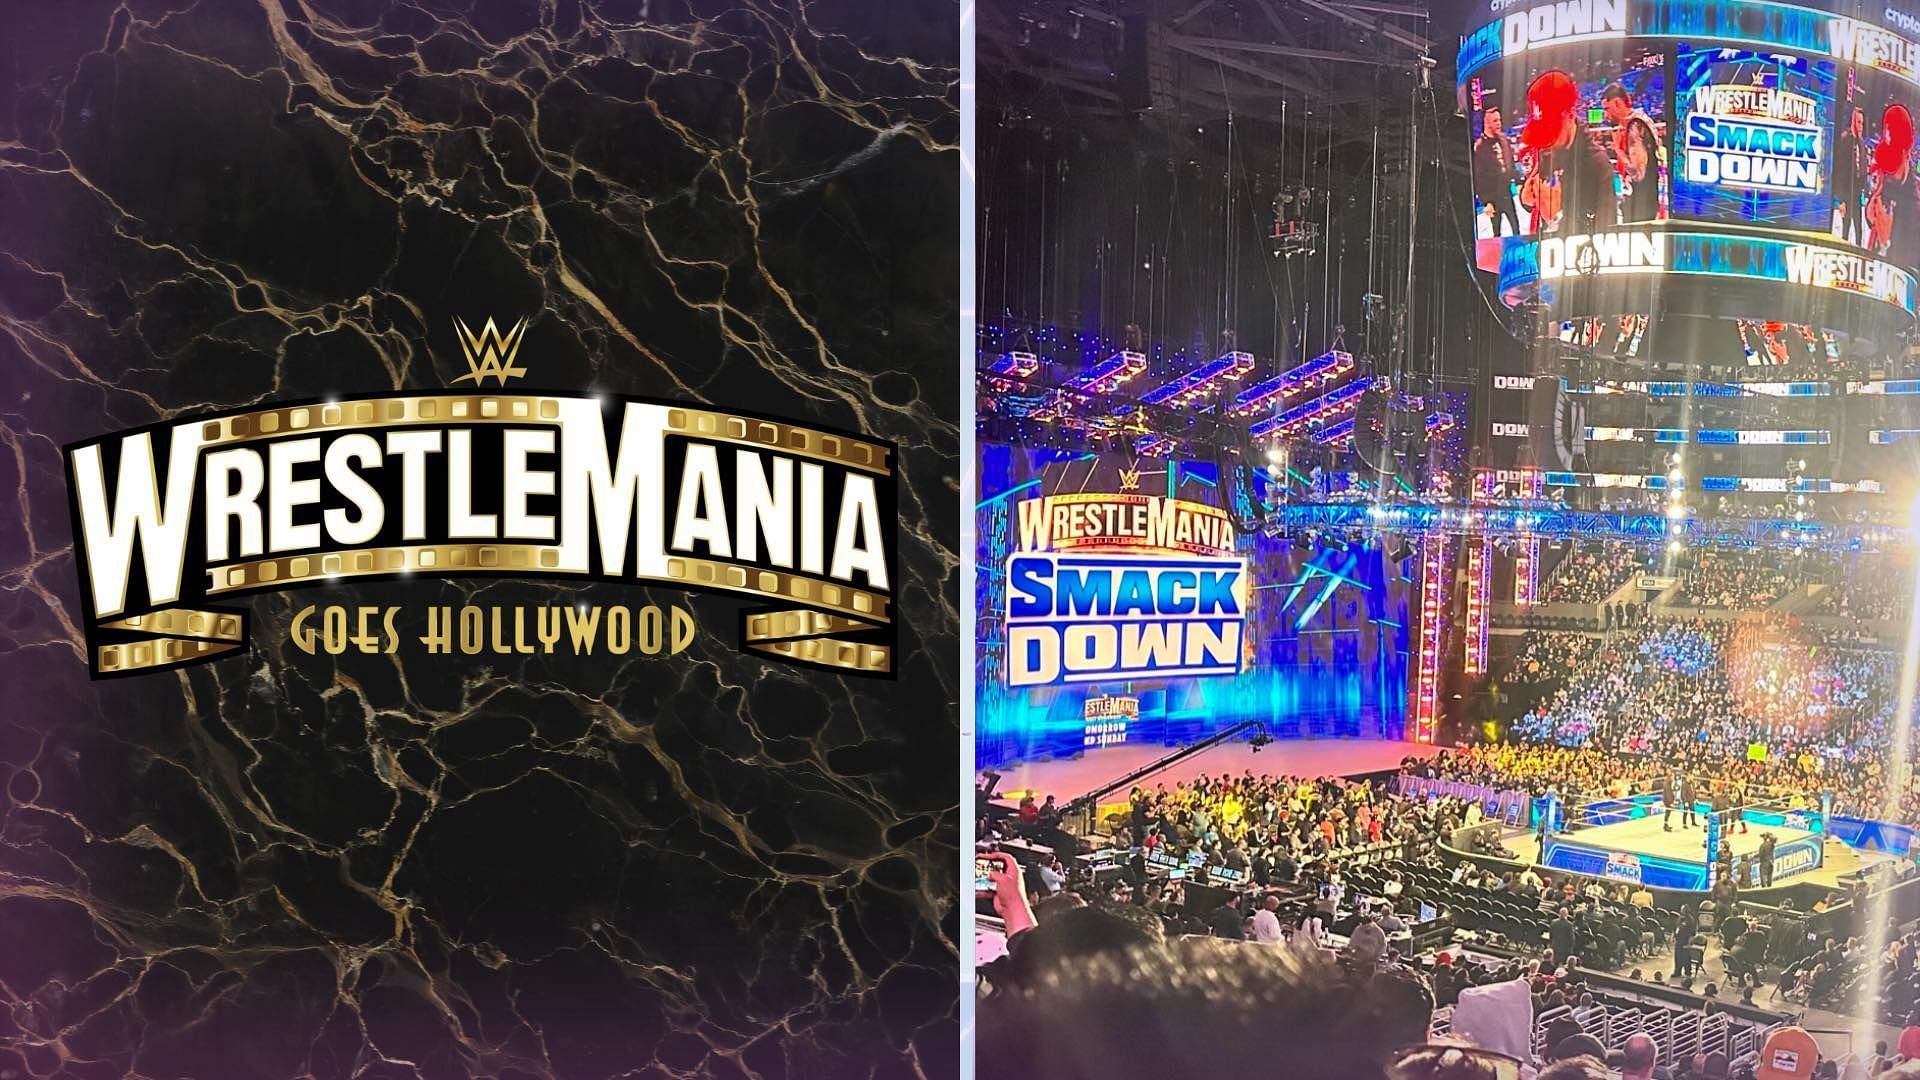 WrestleMania weekend is set to be a really big one